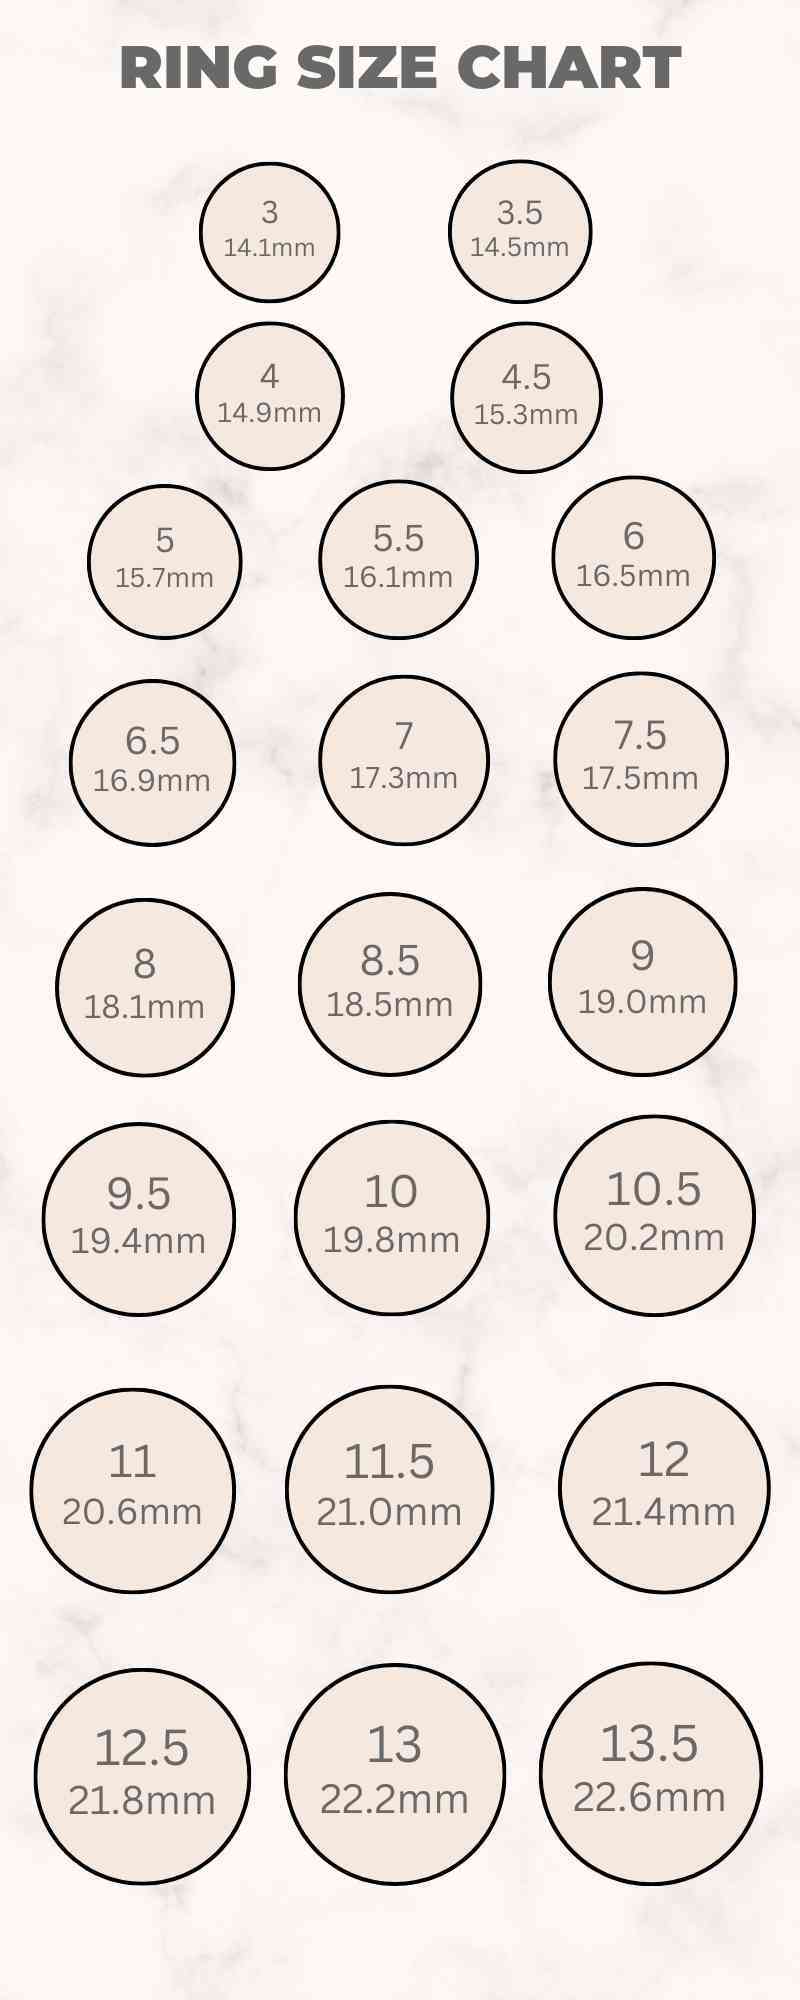 A ring size chart displaying different ring sizes in millimeters or inches. The chart includes a range of sizes from small to large and can be used as a reference to determine the appropriate ring size for an individual's finger.